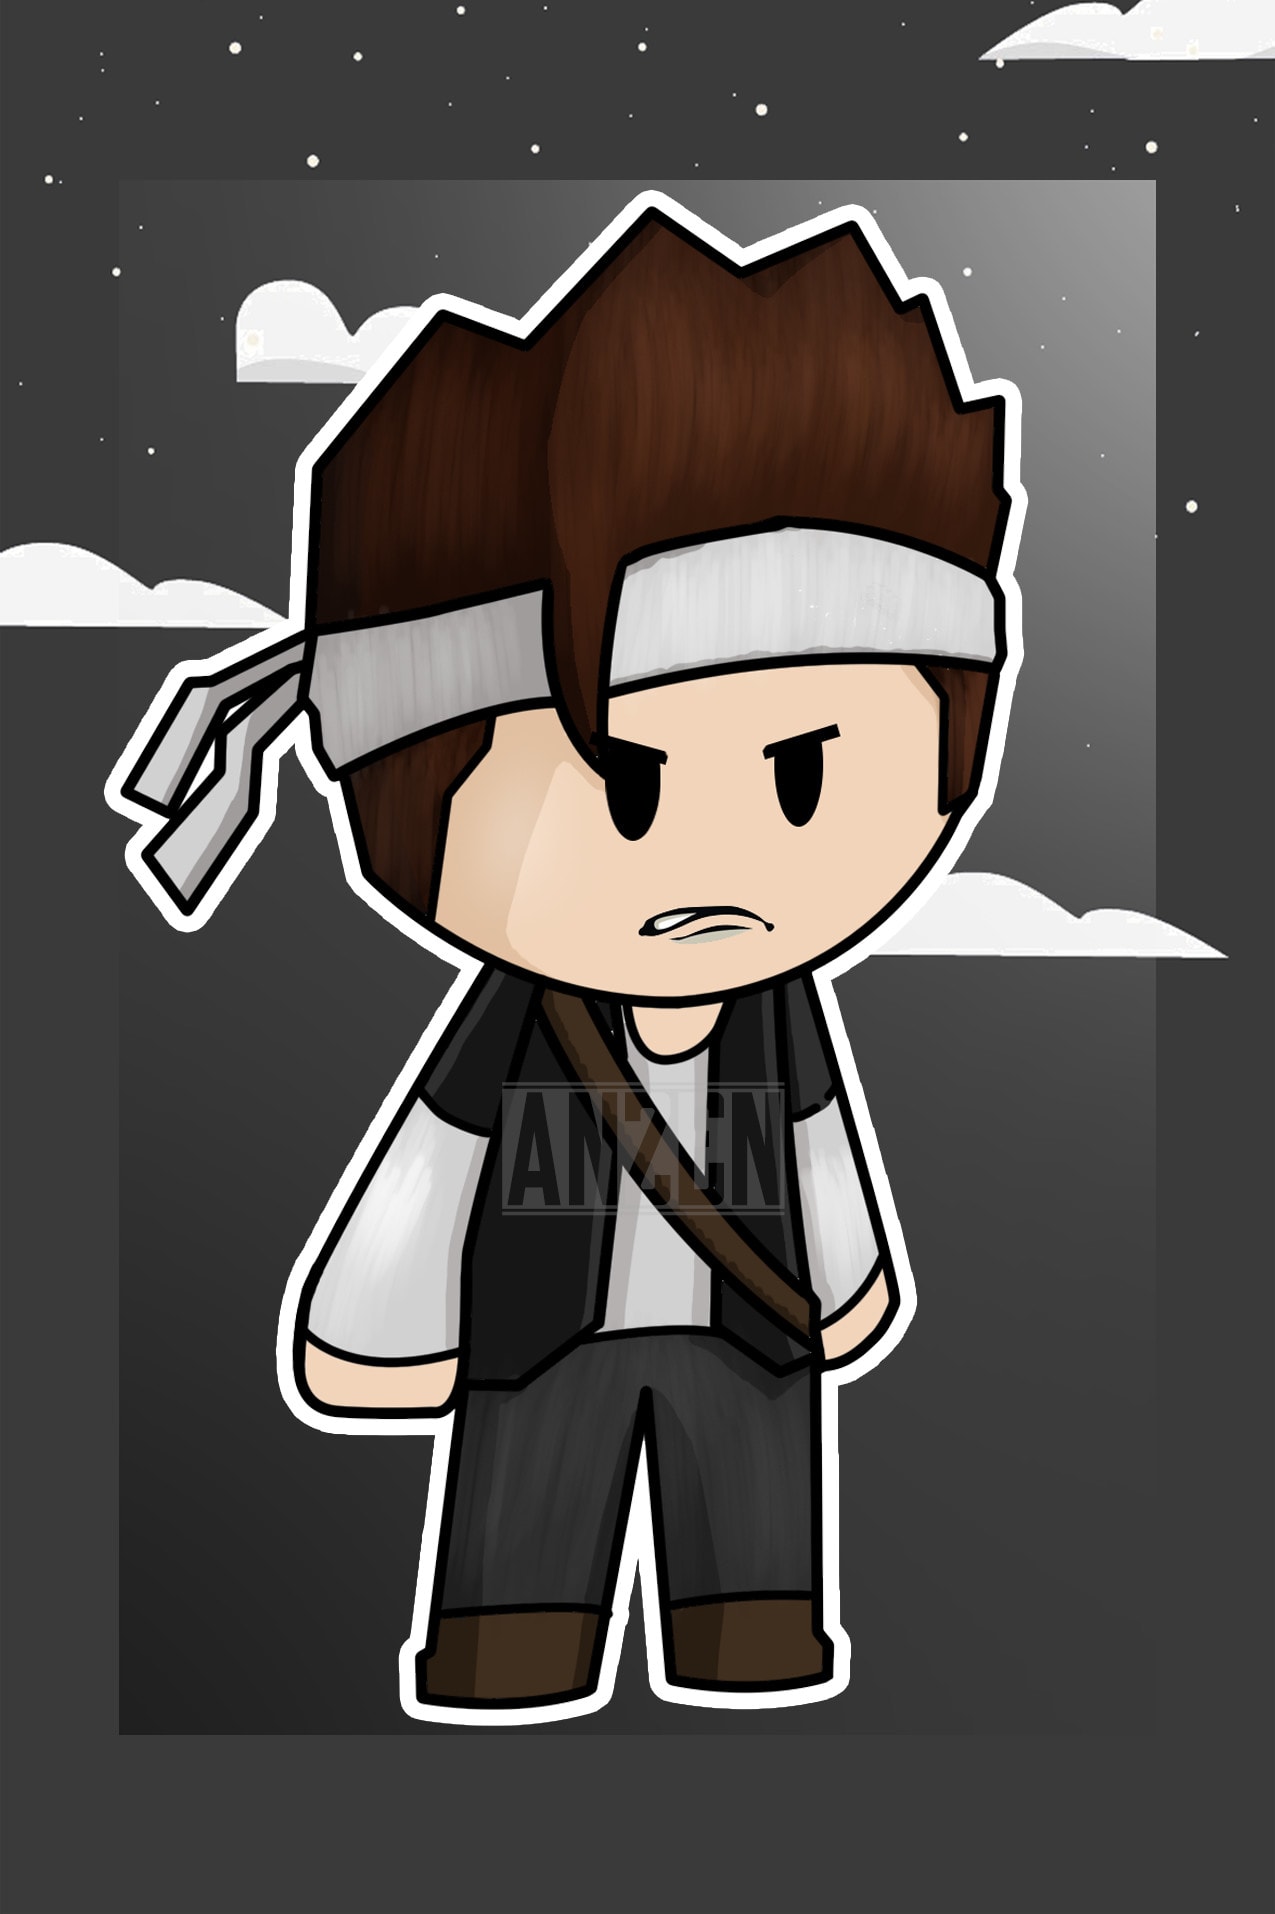 Draw roblox or minecraft character chibi version by Anzenb | Fiverr